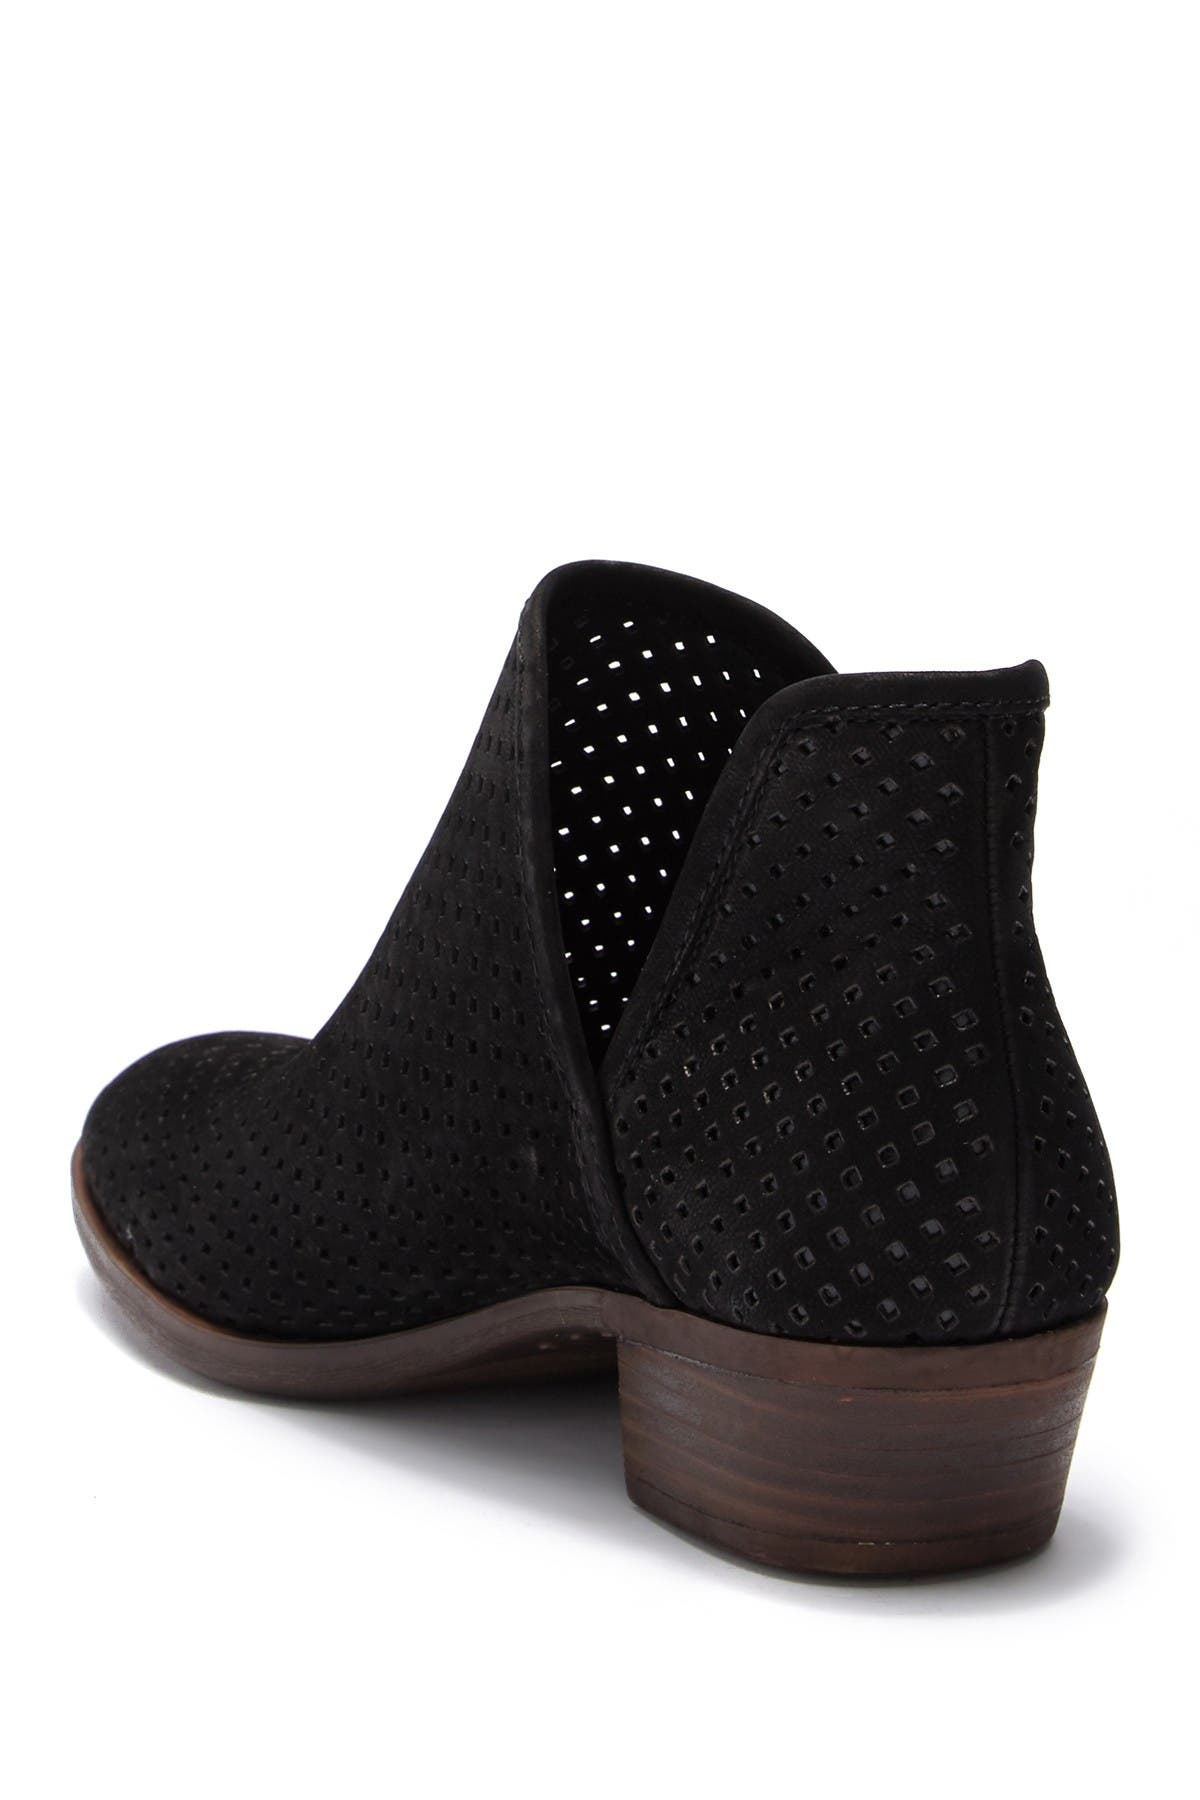 Lucky Brand | Brooklin Perforated Suede 